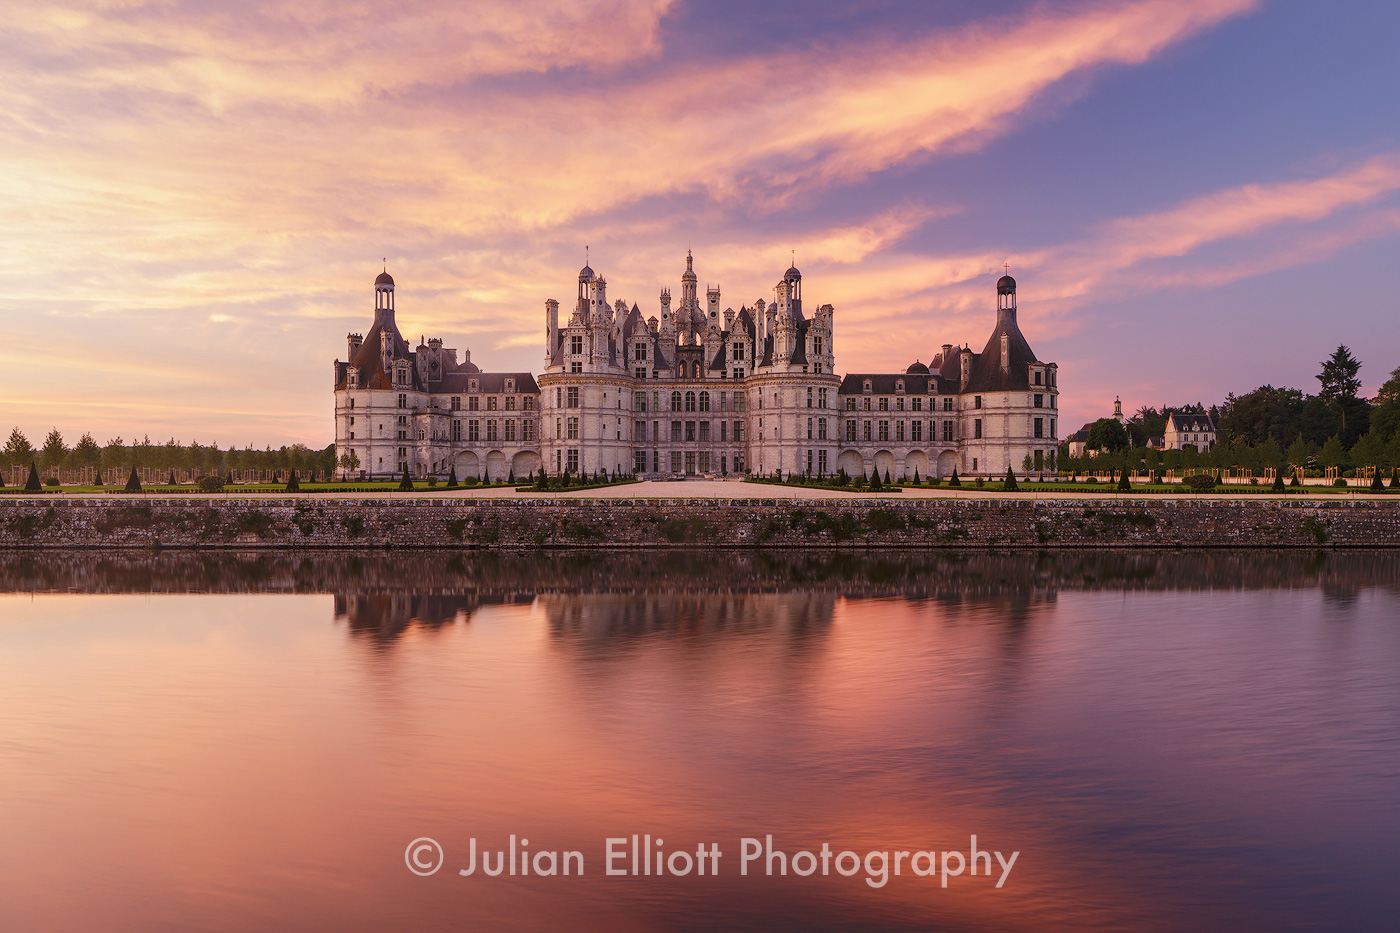 The chateau of Chambord in France.